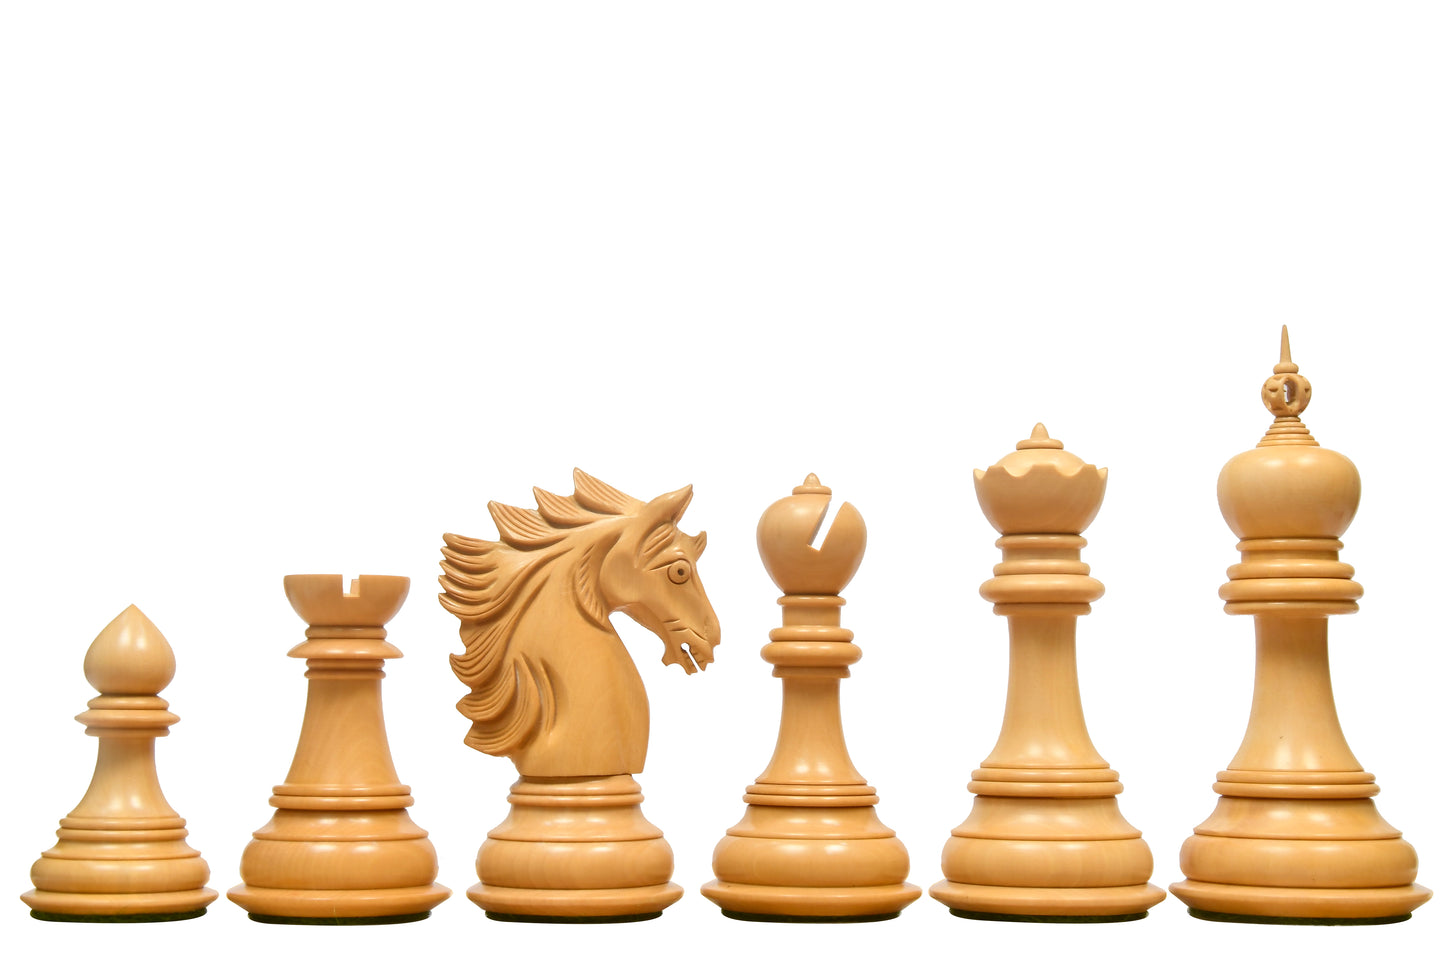 The Sher-E-Punjab Series Chess Pieces in Bud Rose Wood / Box Wood - 4.6" King